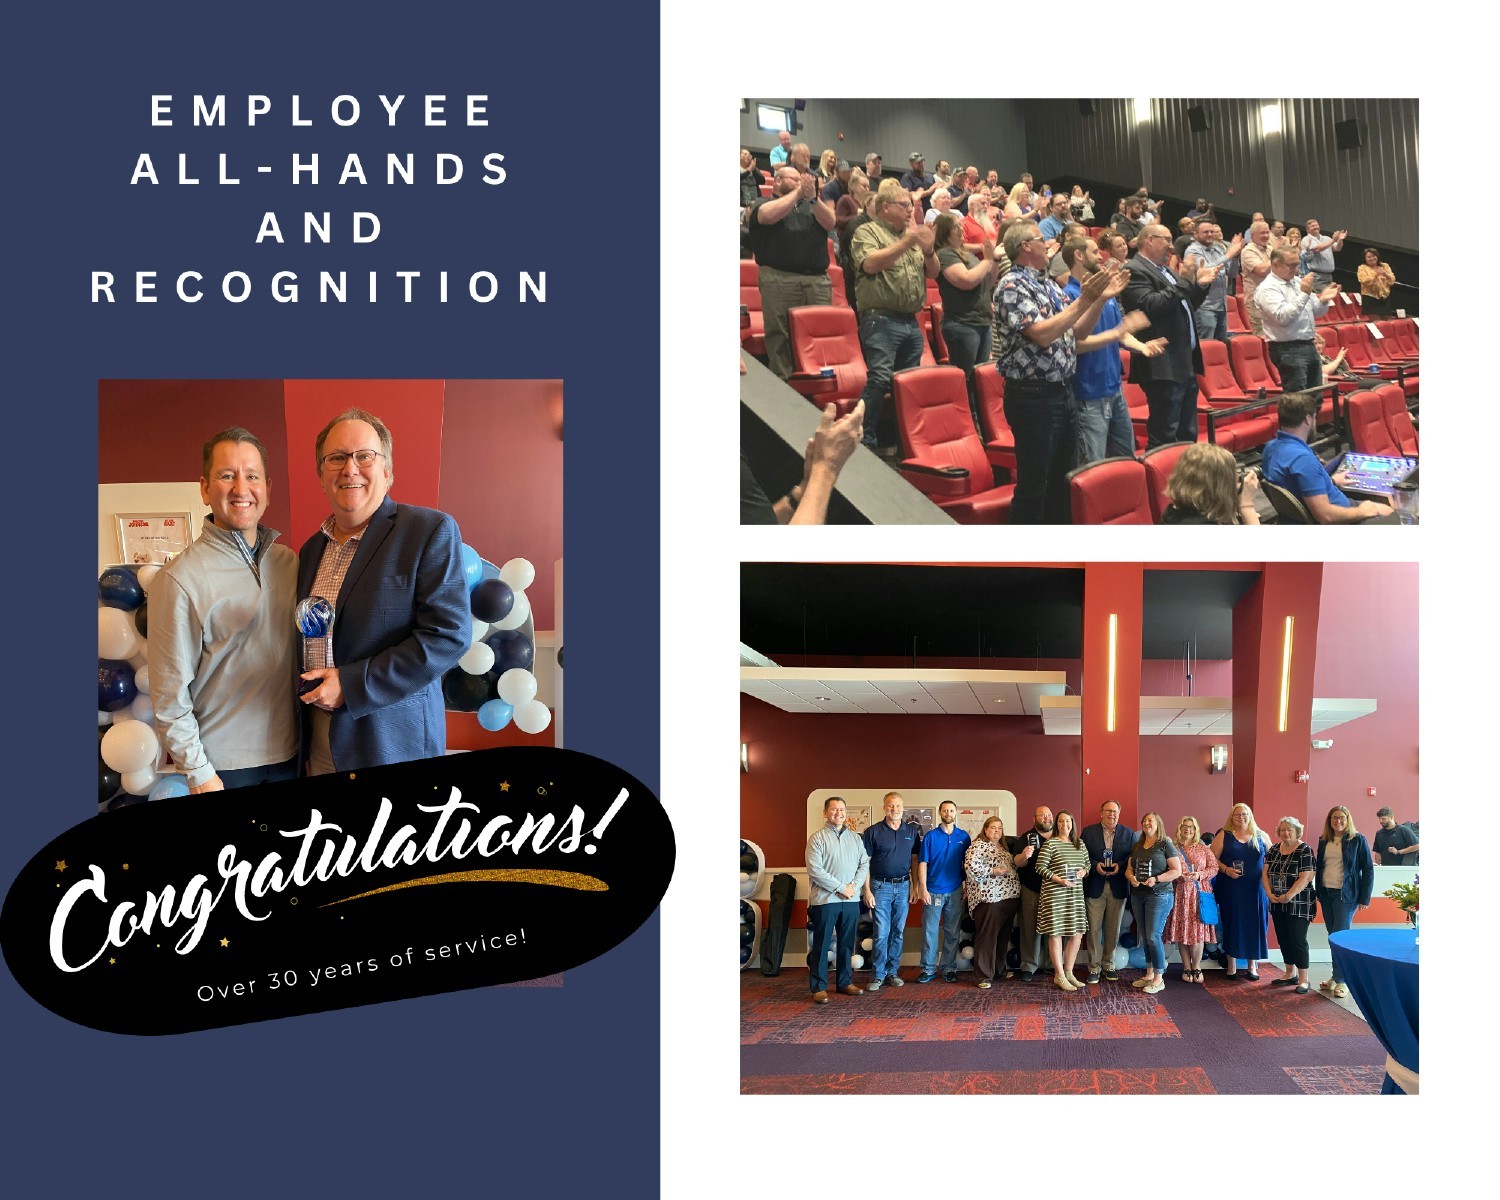 Celebrating our employee's achievements through recognition and gathering to learn about our industry and company